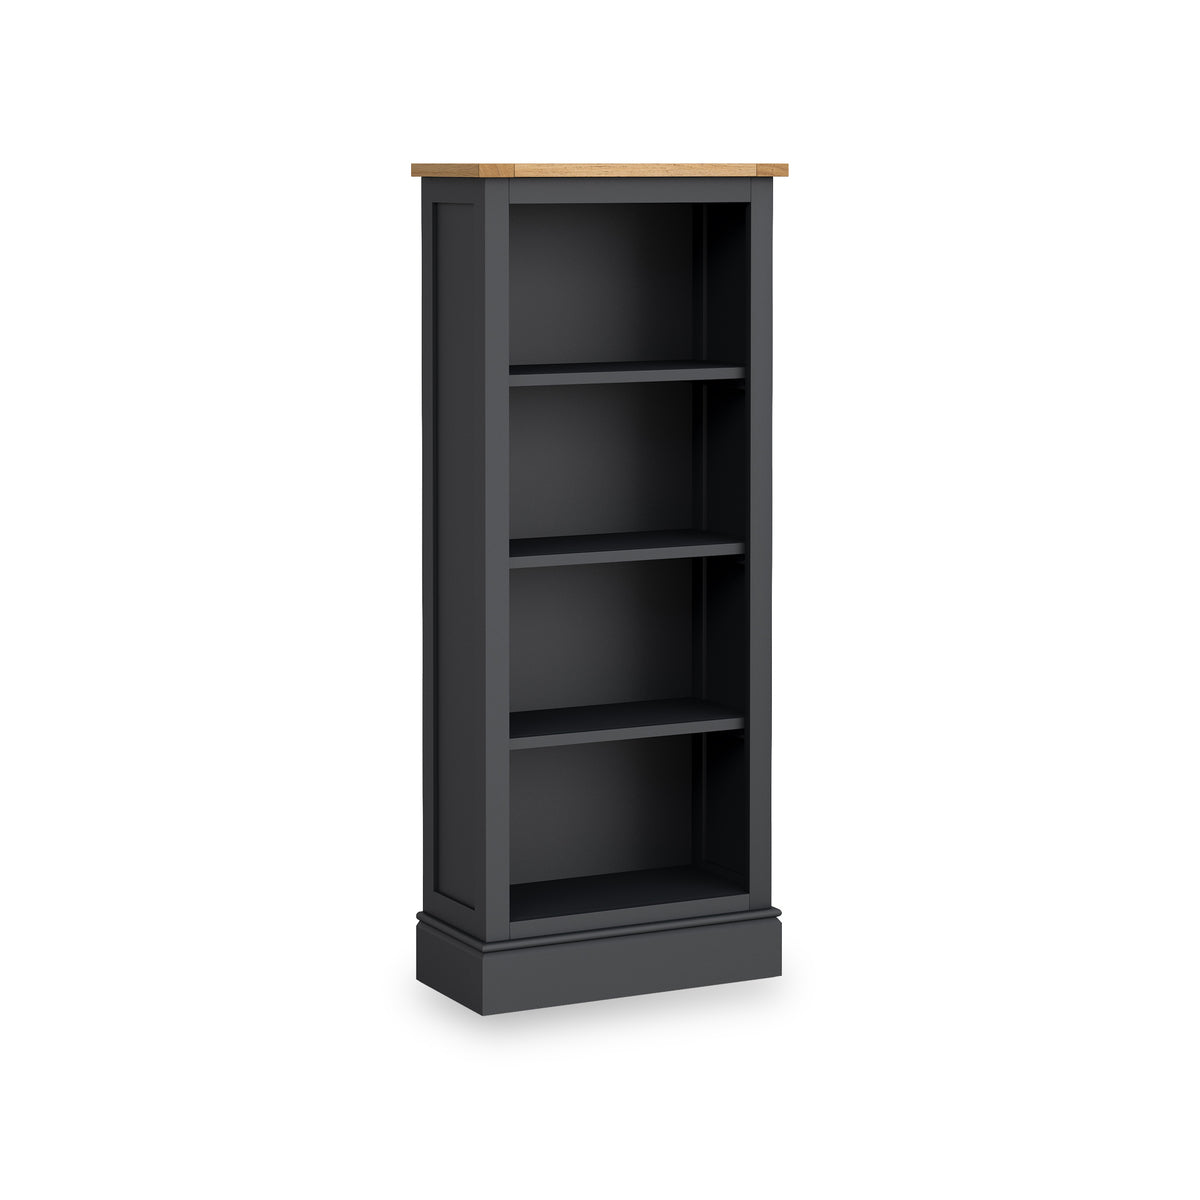 Bude Charcoal Slim Bookcase with Painted Shelves from Roseland Furniture